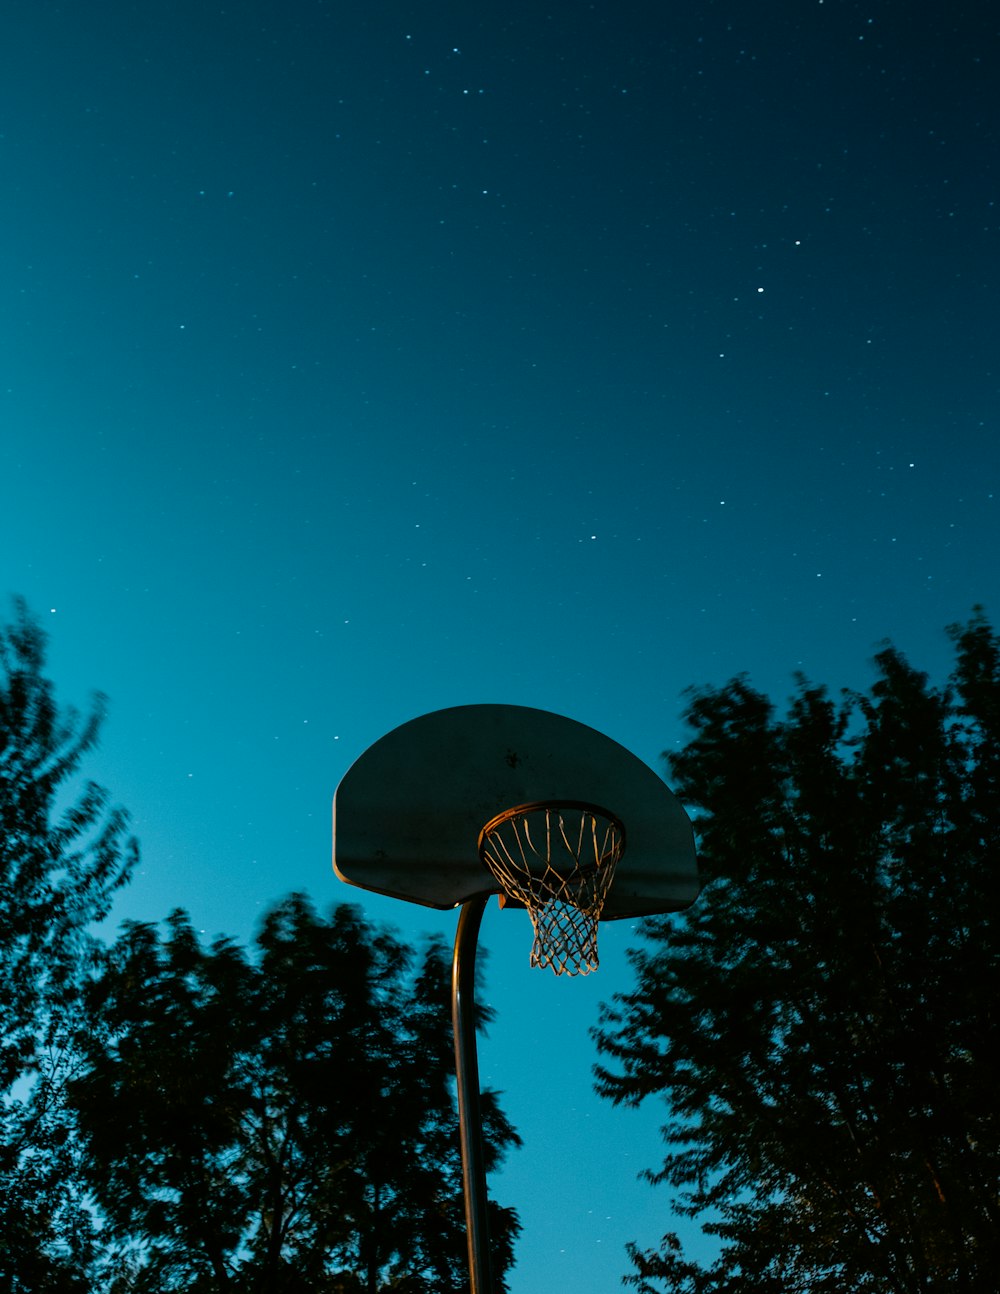 brown and white basketball hoop near trees